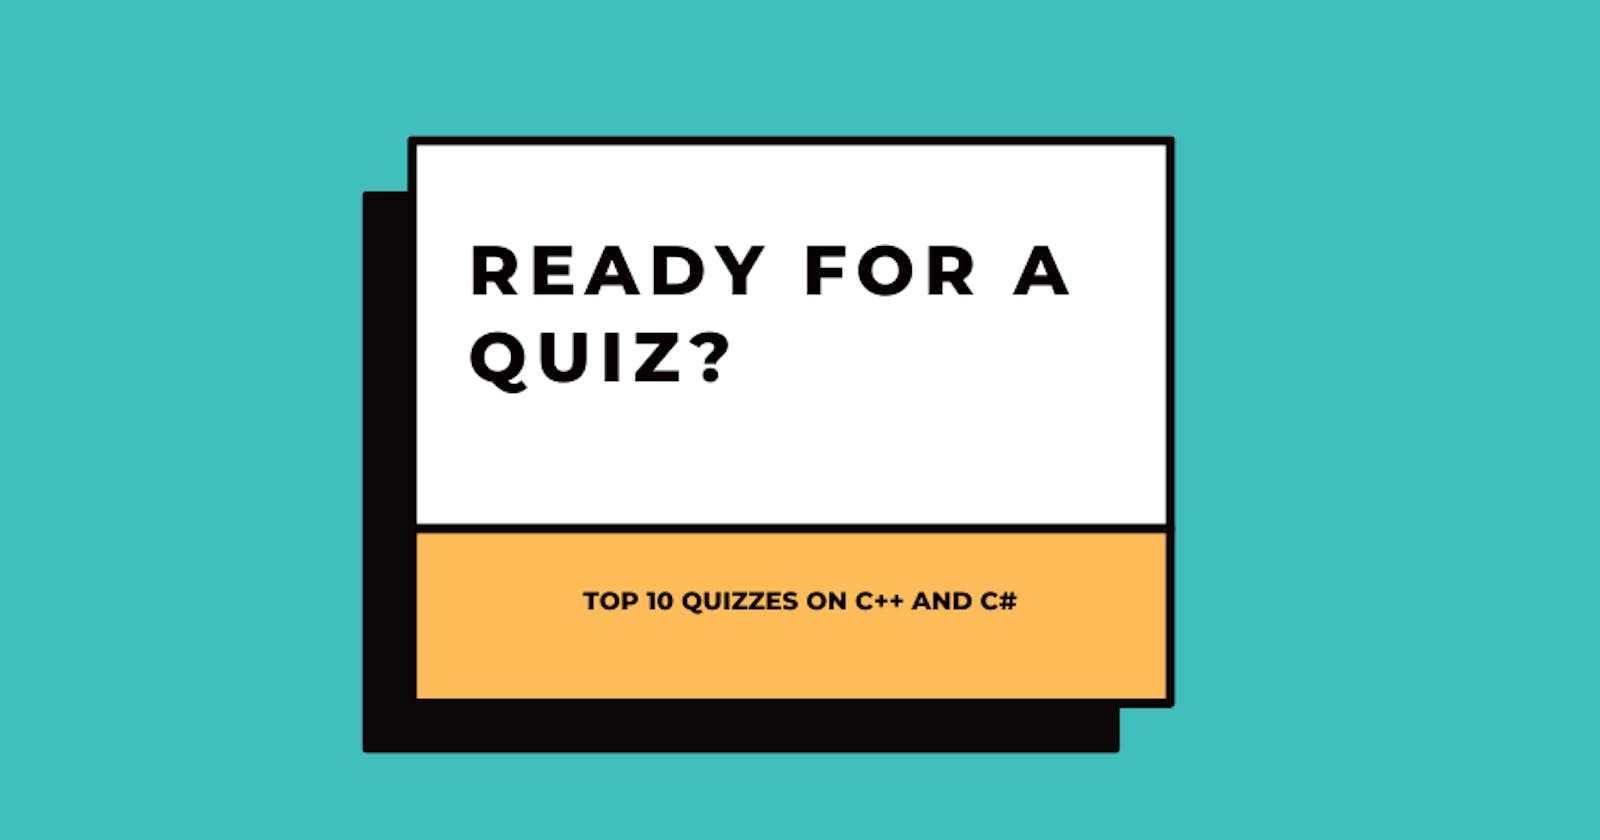 Top 10 quizzes on C++ and C#